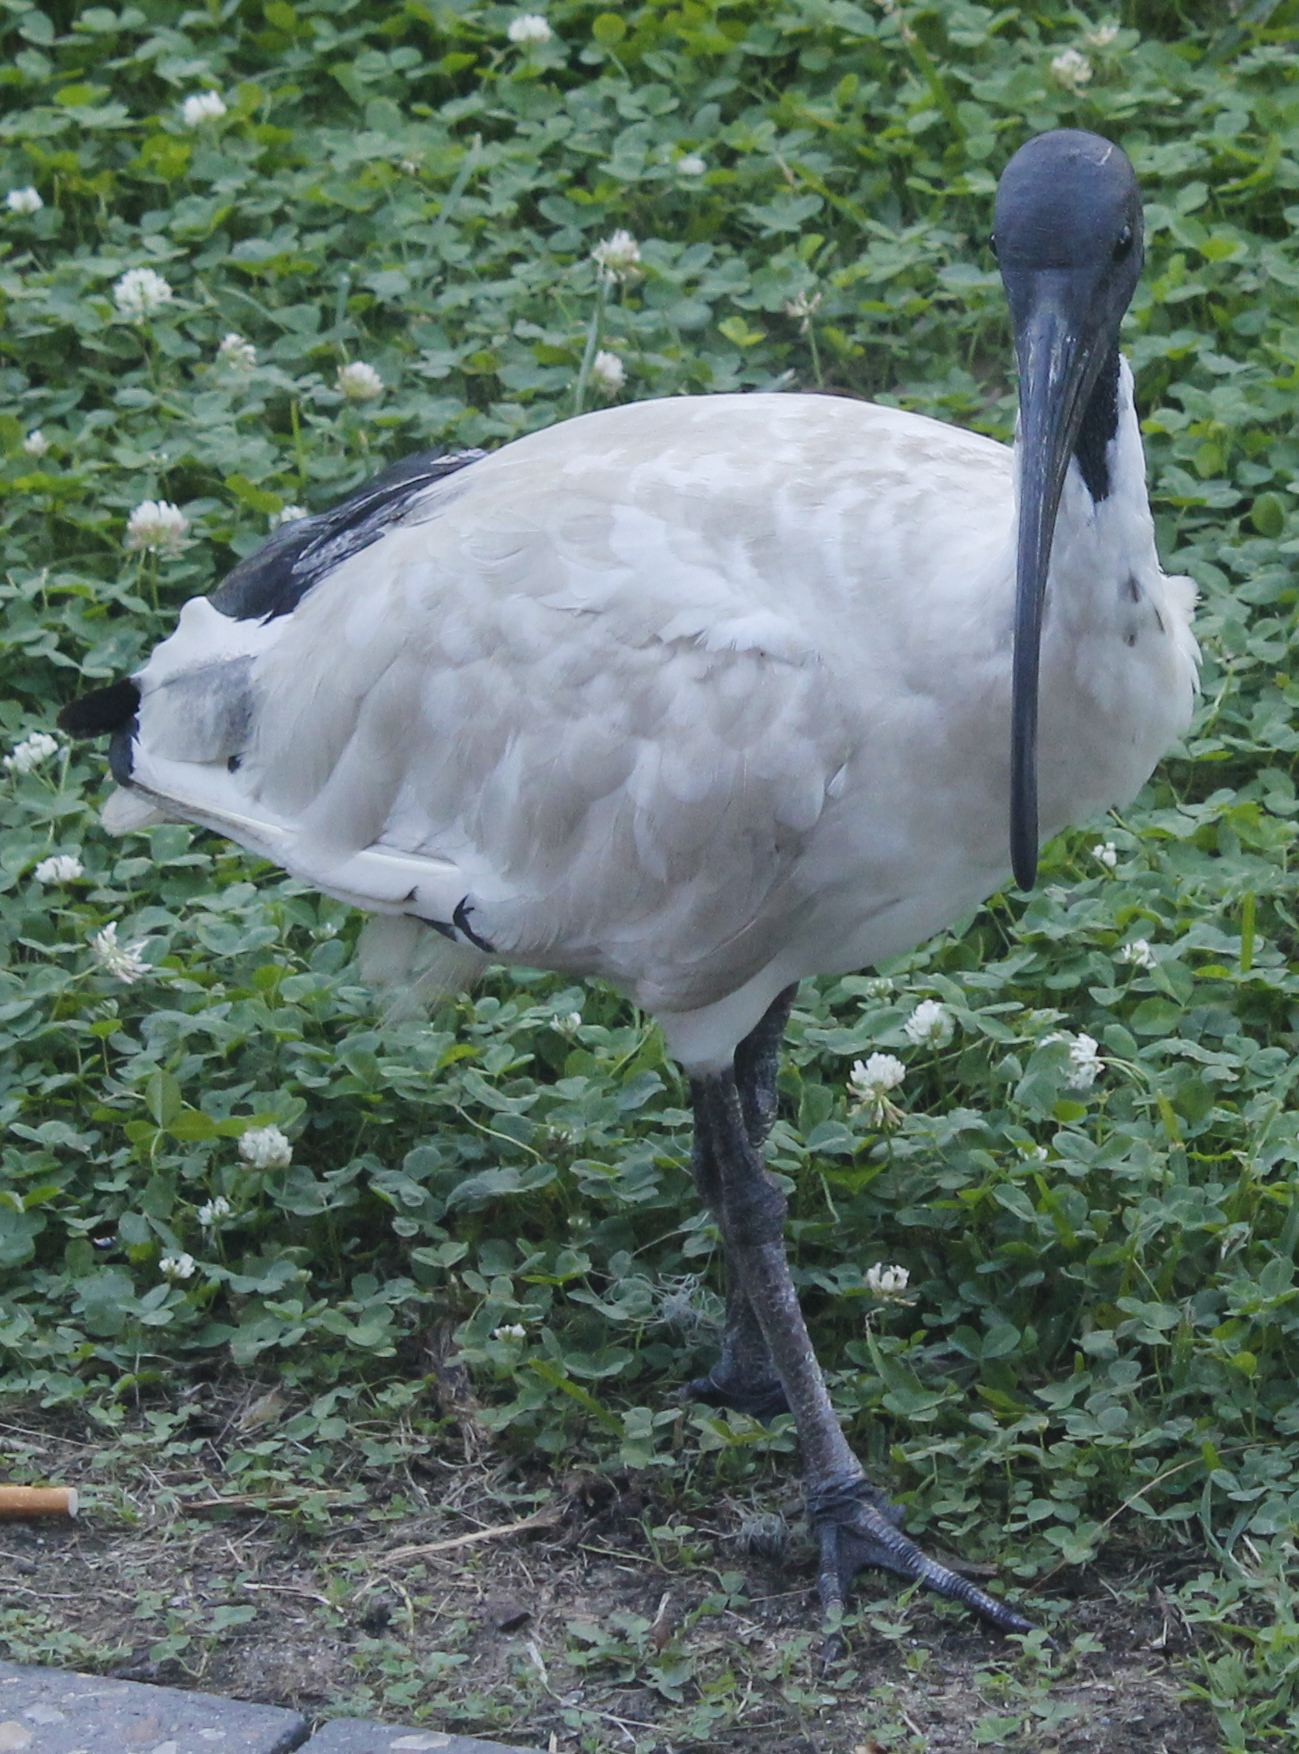 A white ibis bird stands on grass with its head turned to face the camera. Its body is similar in size and shape to a chicken’s, but its legs are longer and its head is smaller. Its beak is as long as its legs but very thin, curving downwards and tapering to a point. Its head, beak, legs and tail are black, the head looking smooth and bald. The bird’s bright, dark eyes are on either side of its head.